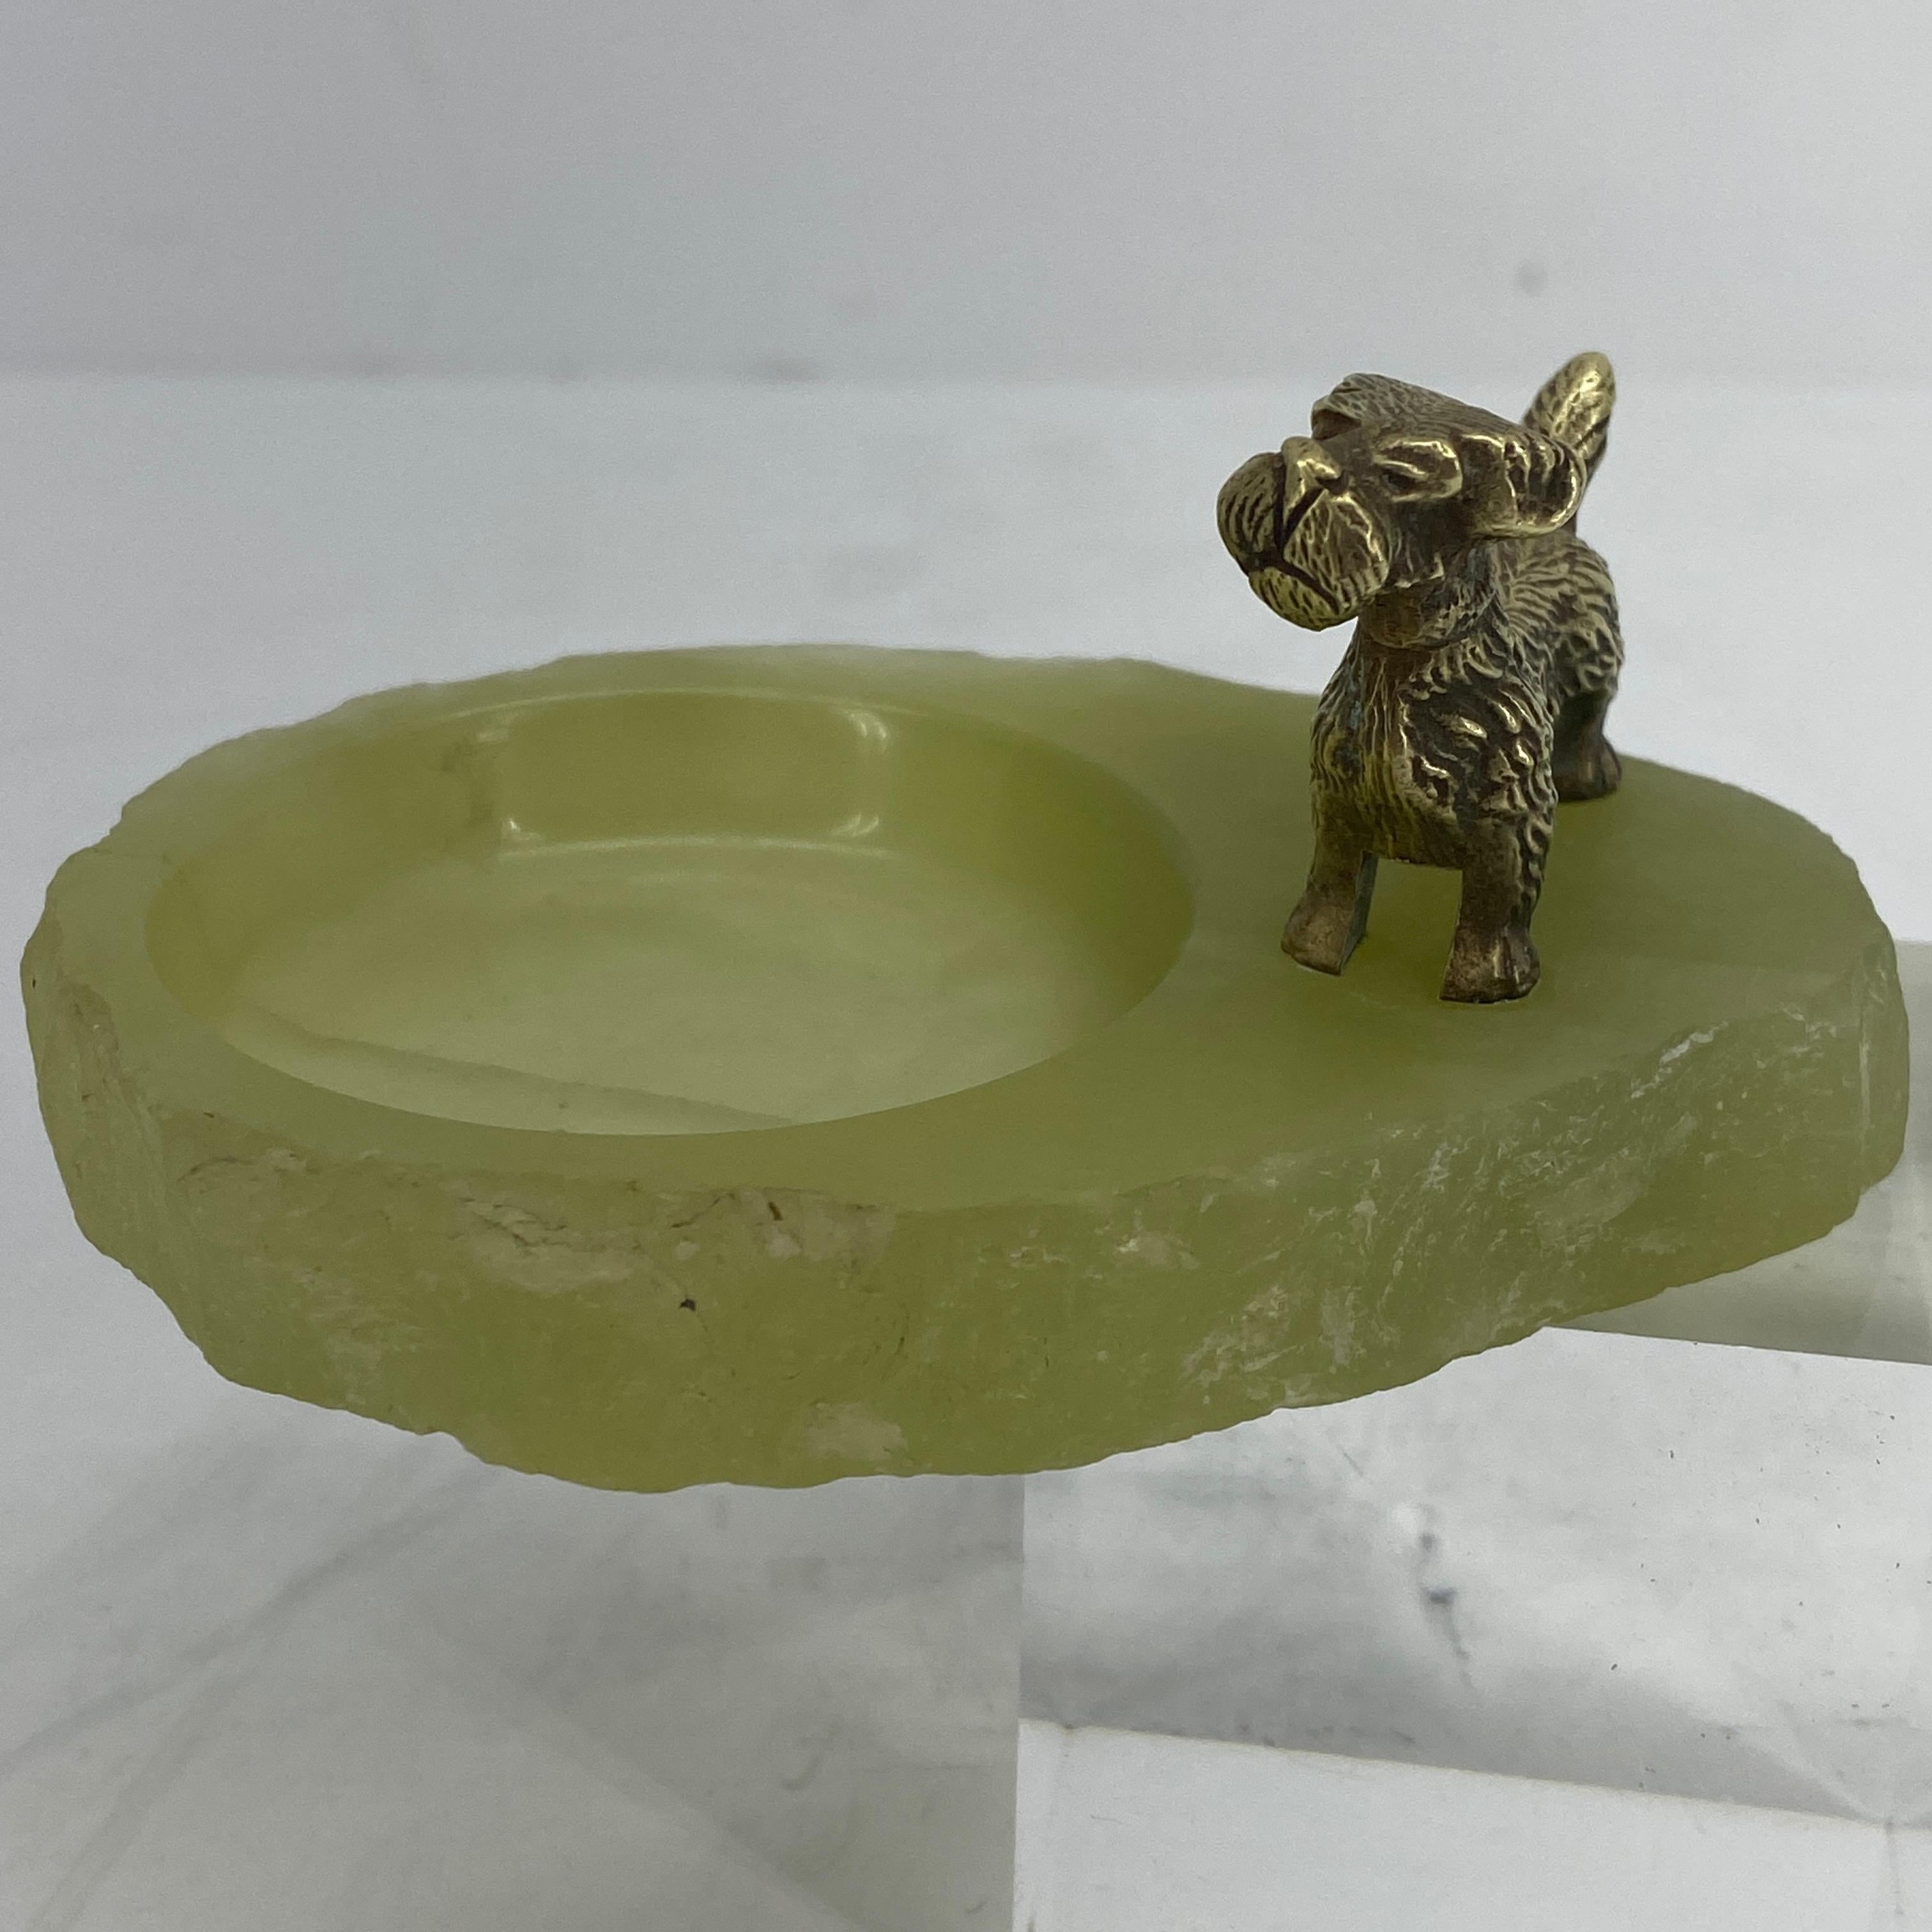 20th Century Pistachio Green Onyx and Bronze Terrier Ashtray or Jewelry Tray